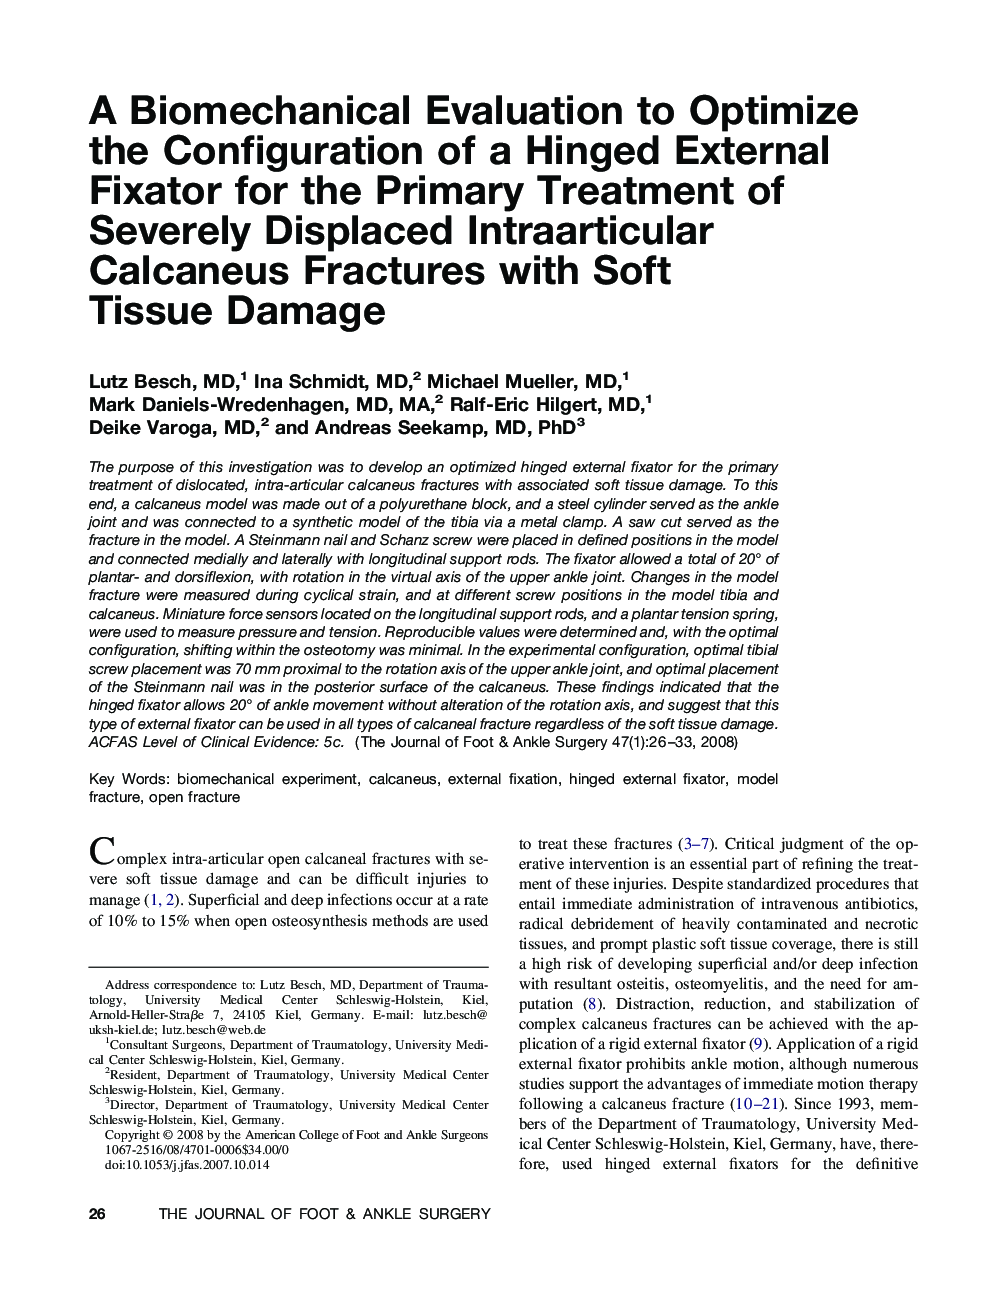 A Biomechanical Evaluation to Optimize the Configuration of a Hinged External Fixator for the Primary Treatment of Severely Displaced Intraarticular Calcaneus Fractures with Soft Tissue Damage